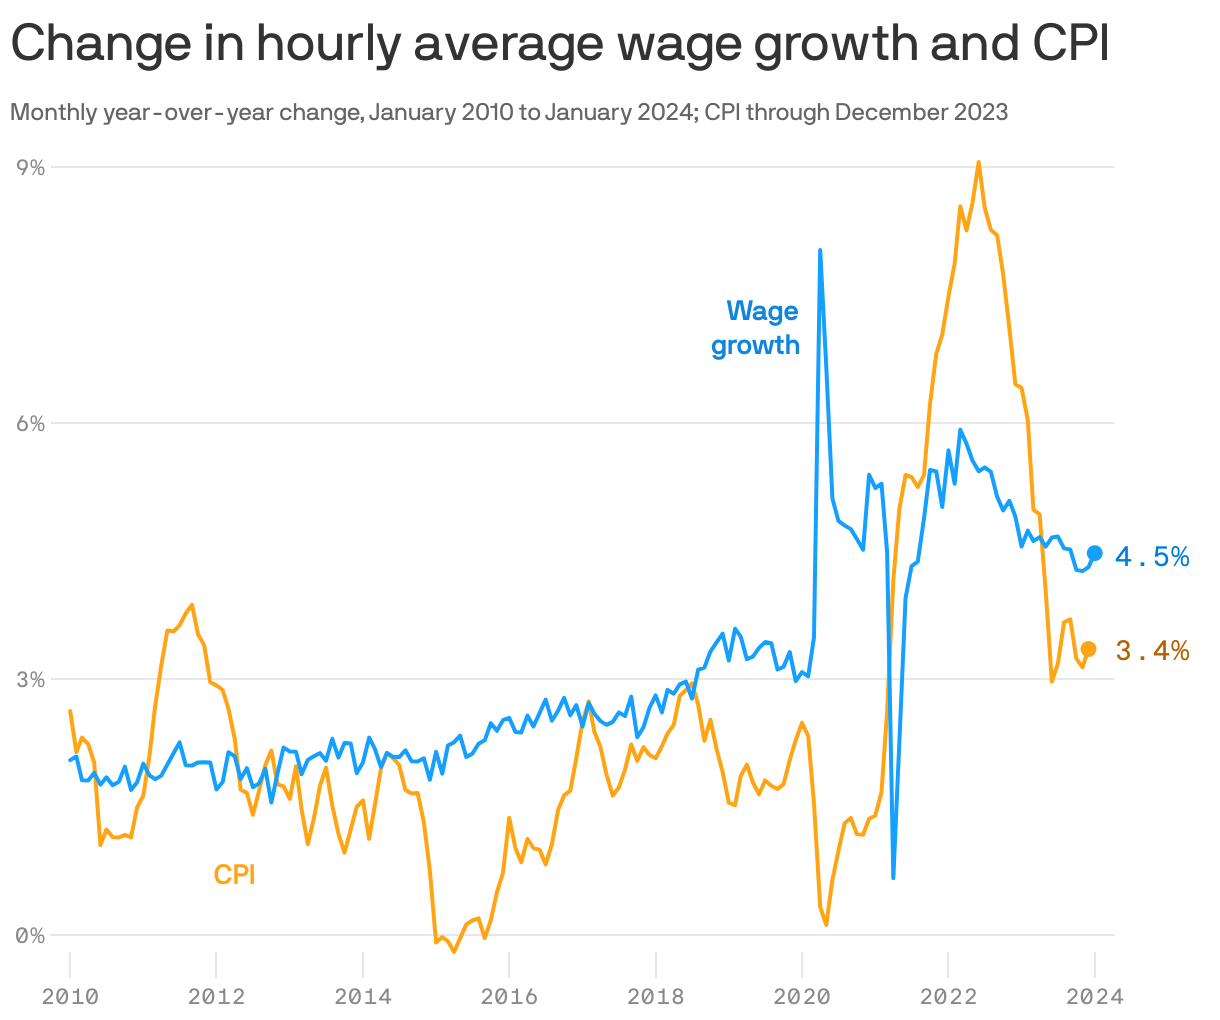 Change in hourly average wage growth and CPI